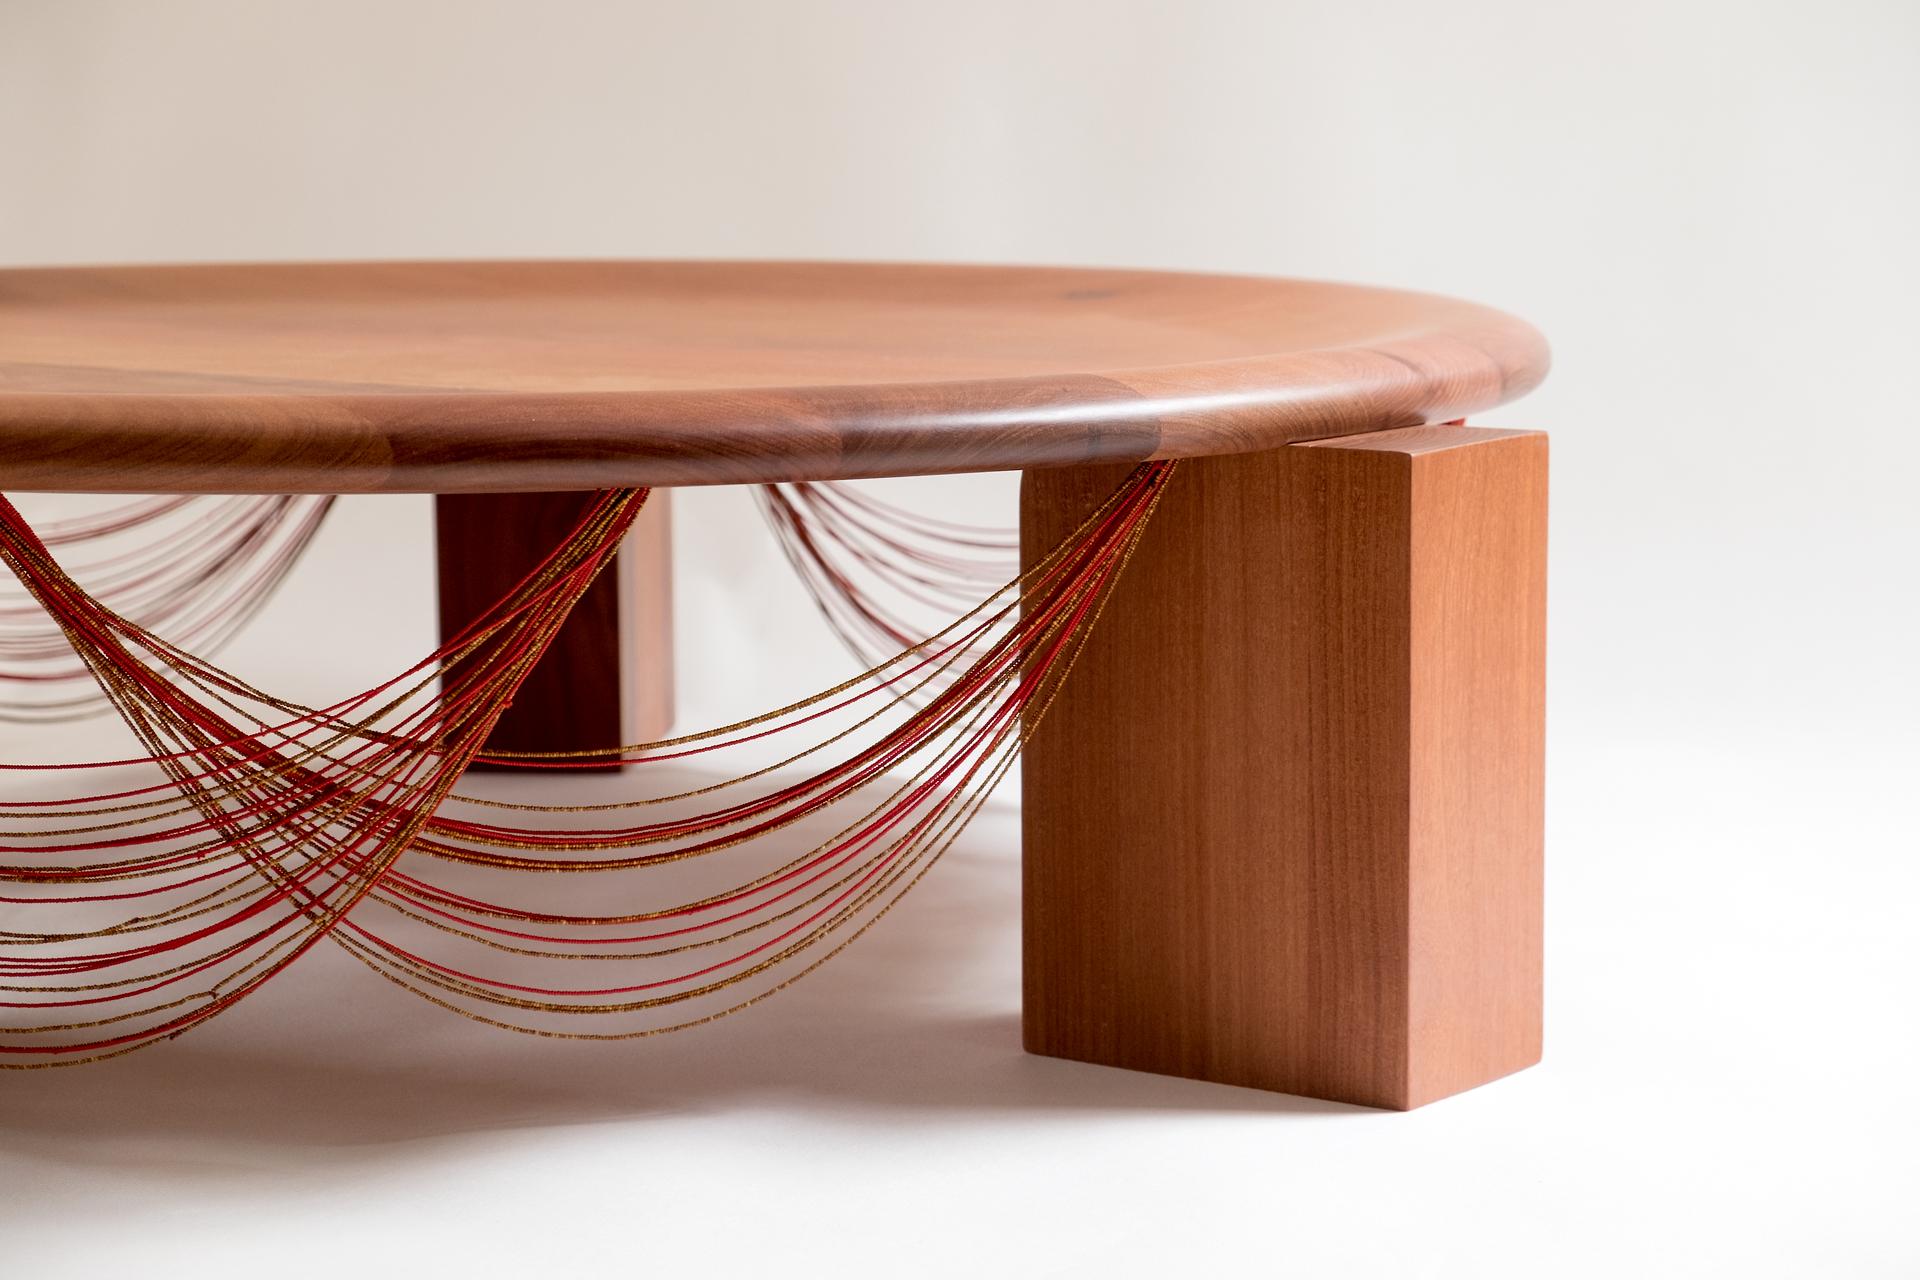 Brazilian Beijú Center Table: handcrafted in Brazil with beads and Cabreúva wood For Sale